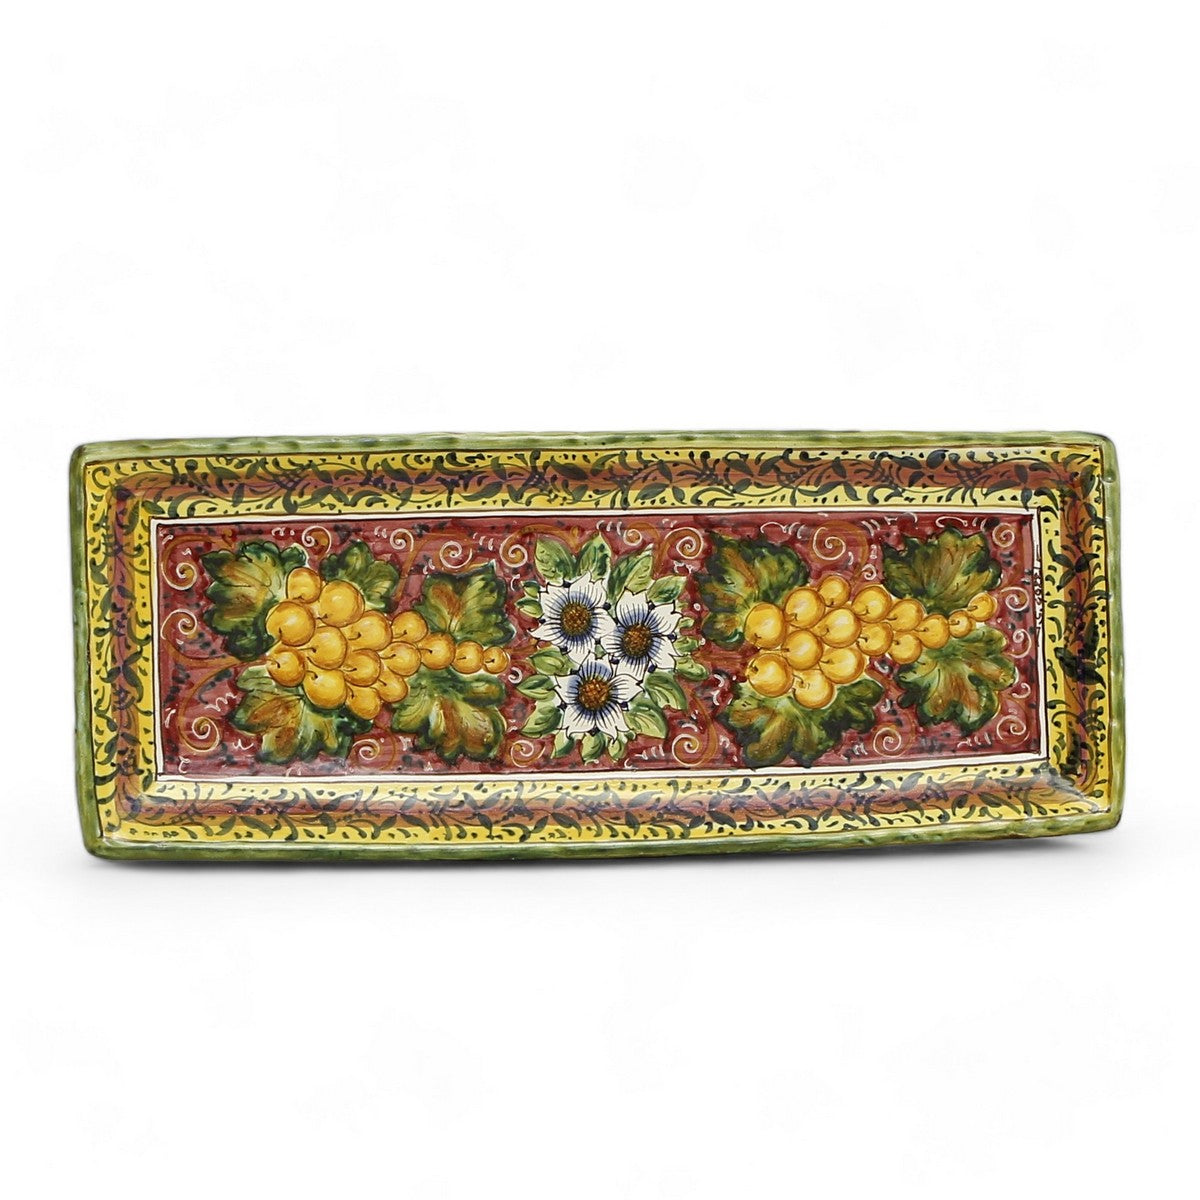 TUSCAN MAJOLICA: Rectangular Deluxe Tray Platter with grapes over a sophisticated Burgundy Red Background and rim.